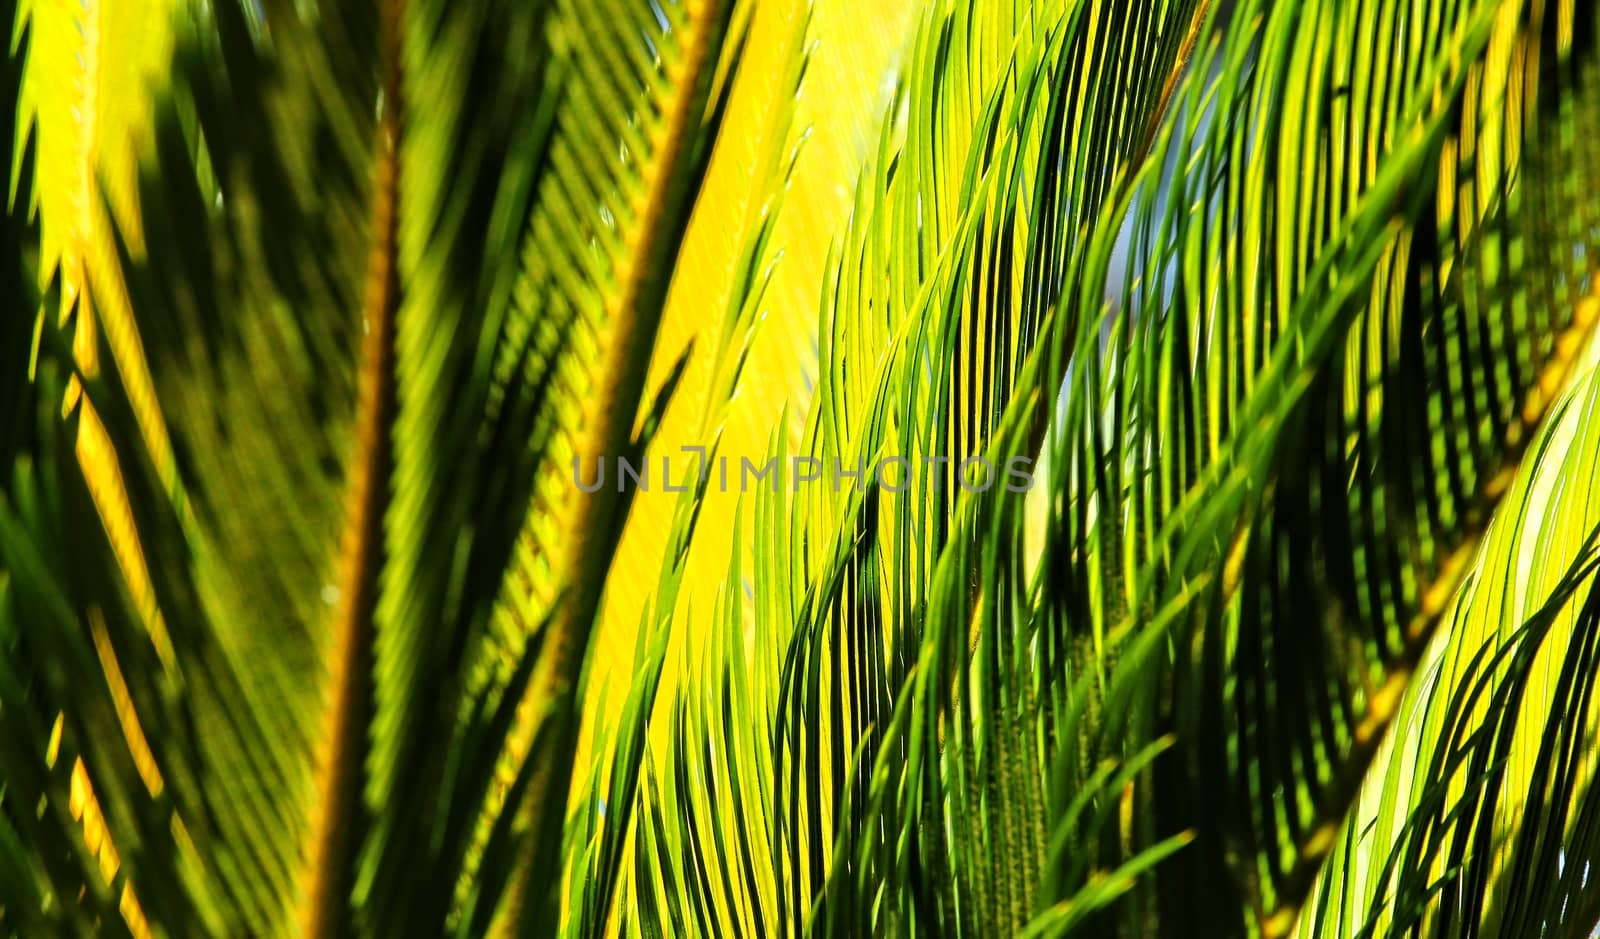 Cycad leaves background by Timmi